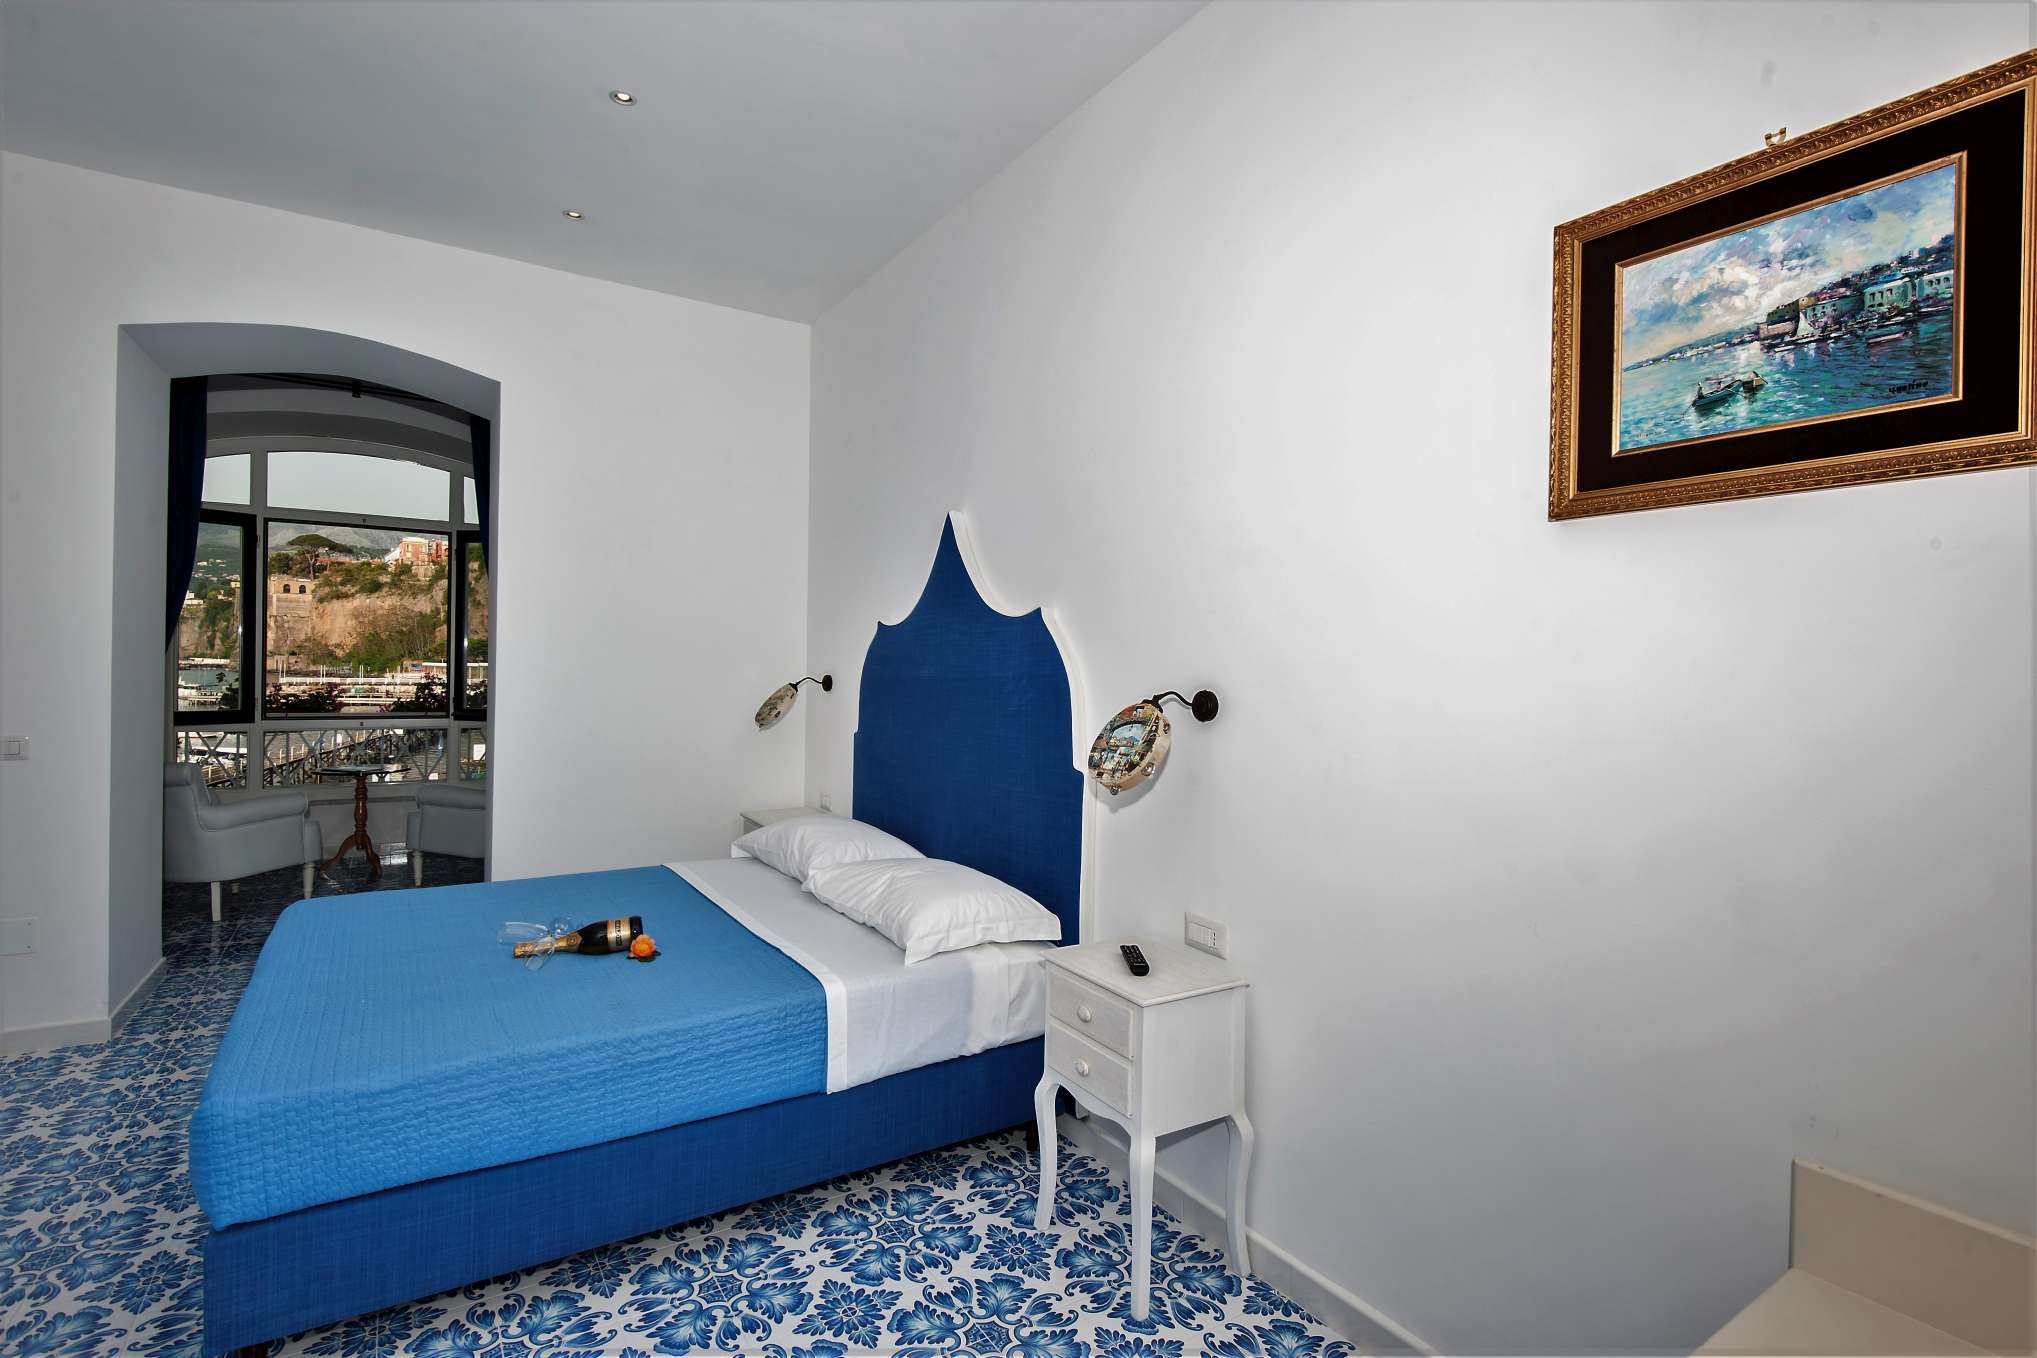 Incanto room of the Surriento Suites bed and breakfast in Sorrento